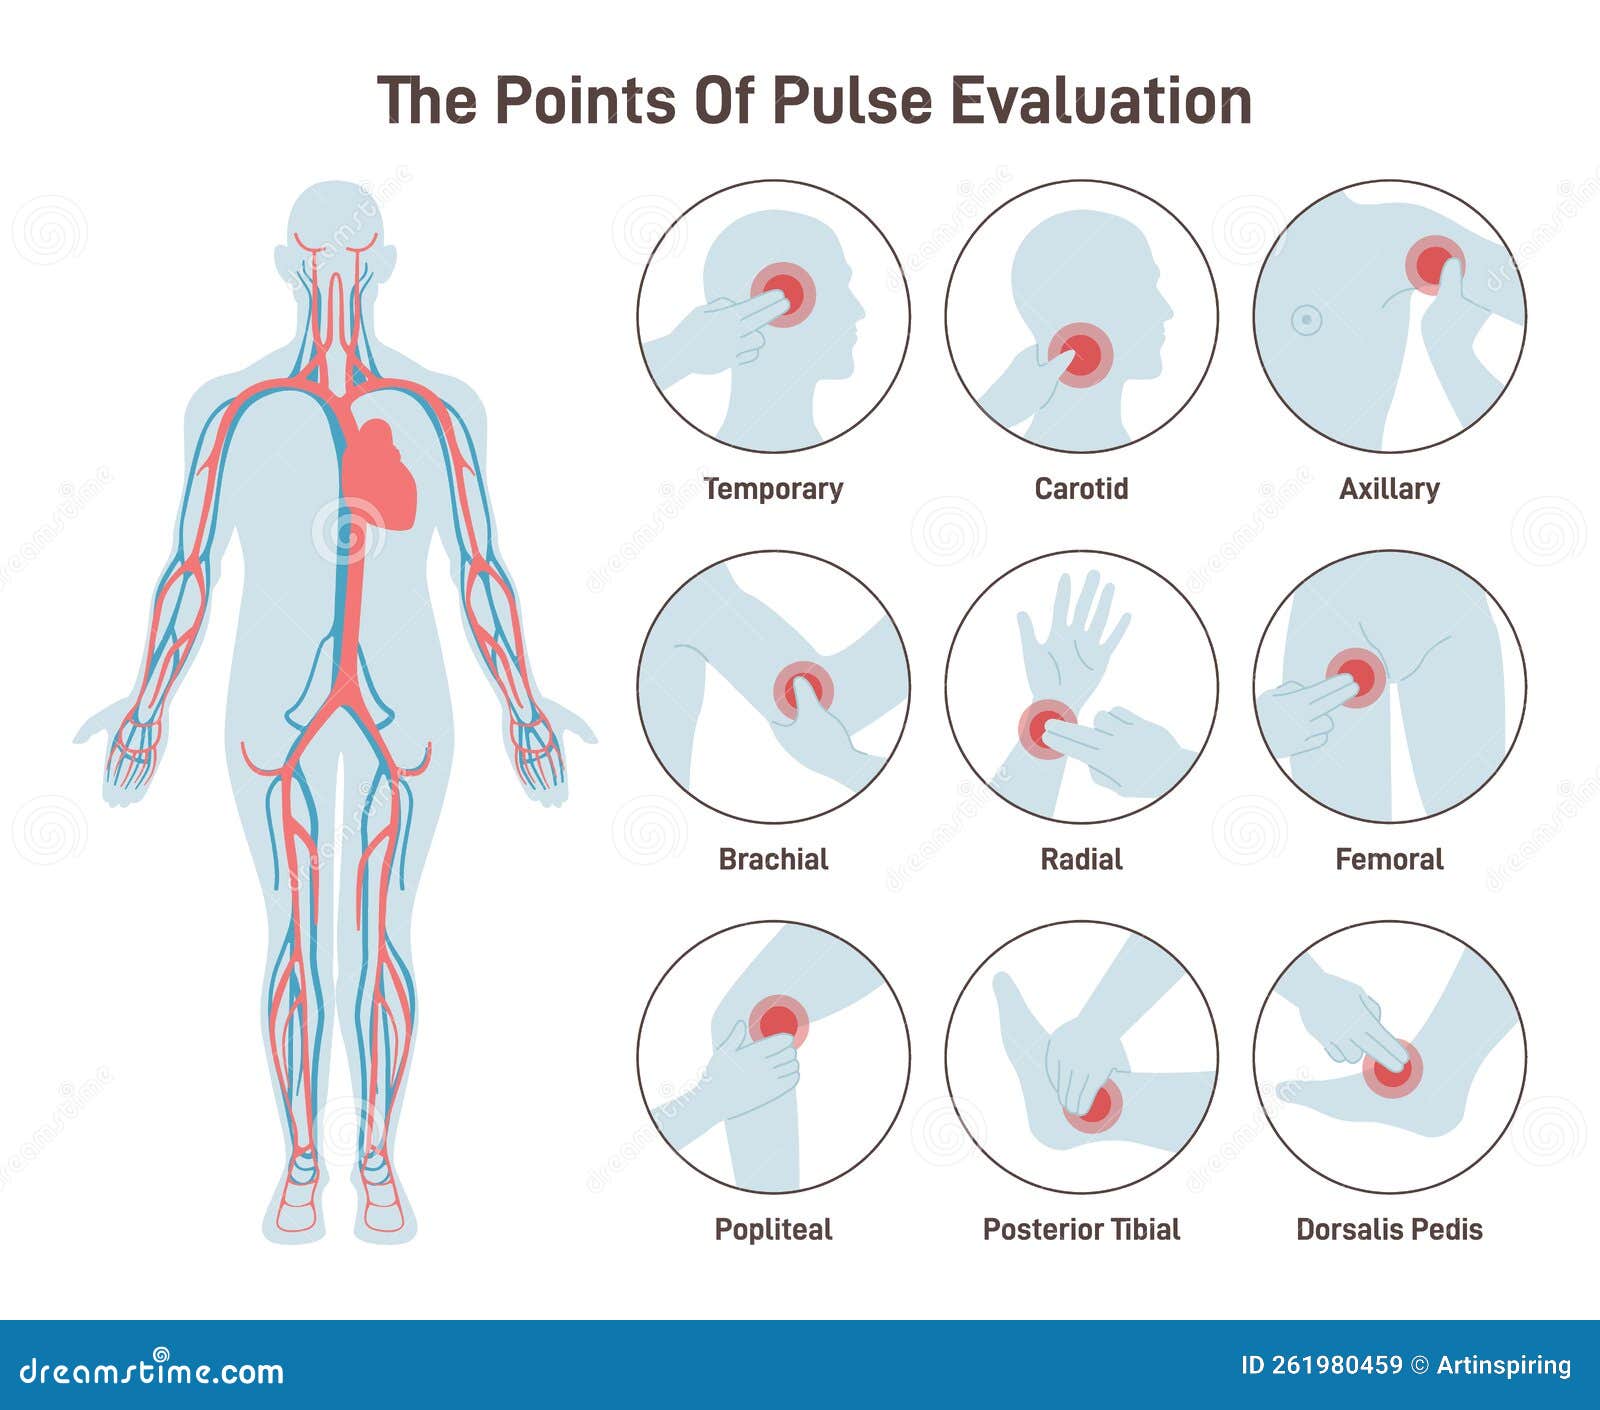 the major arteries and pulse points on human body. heartbeat evaluation